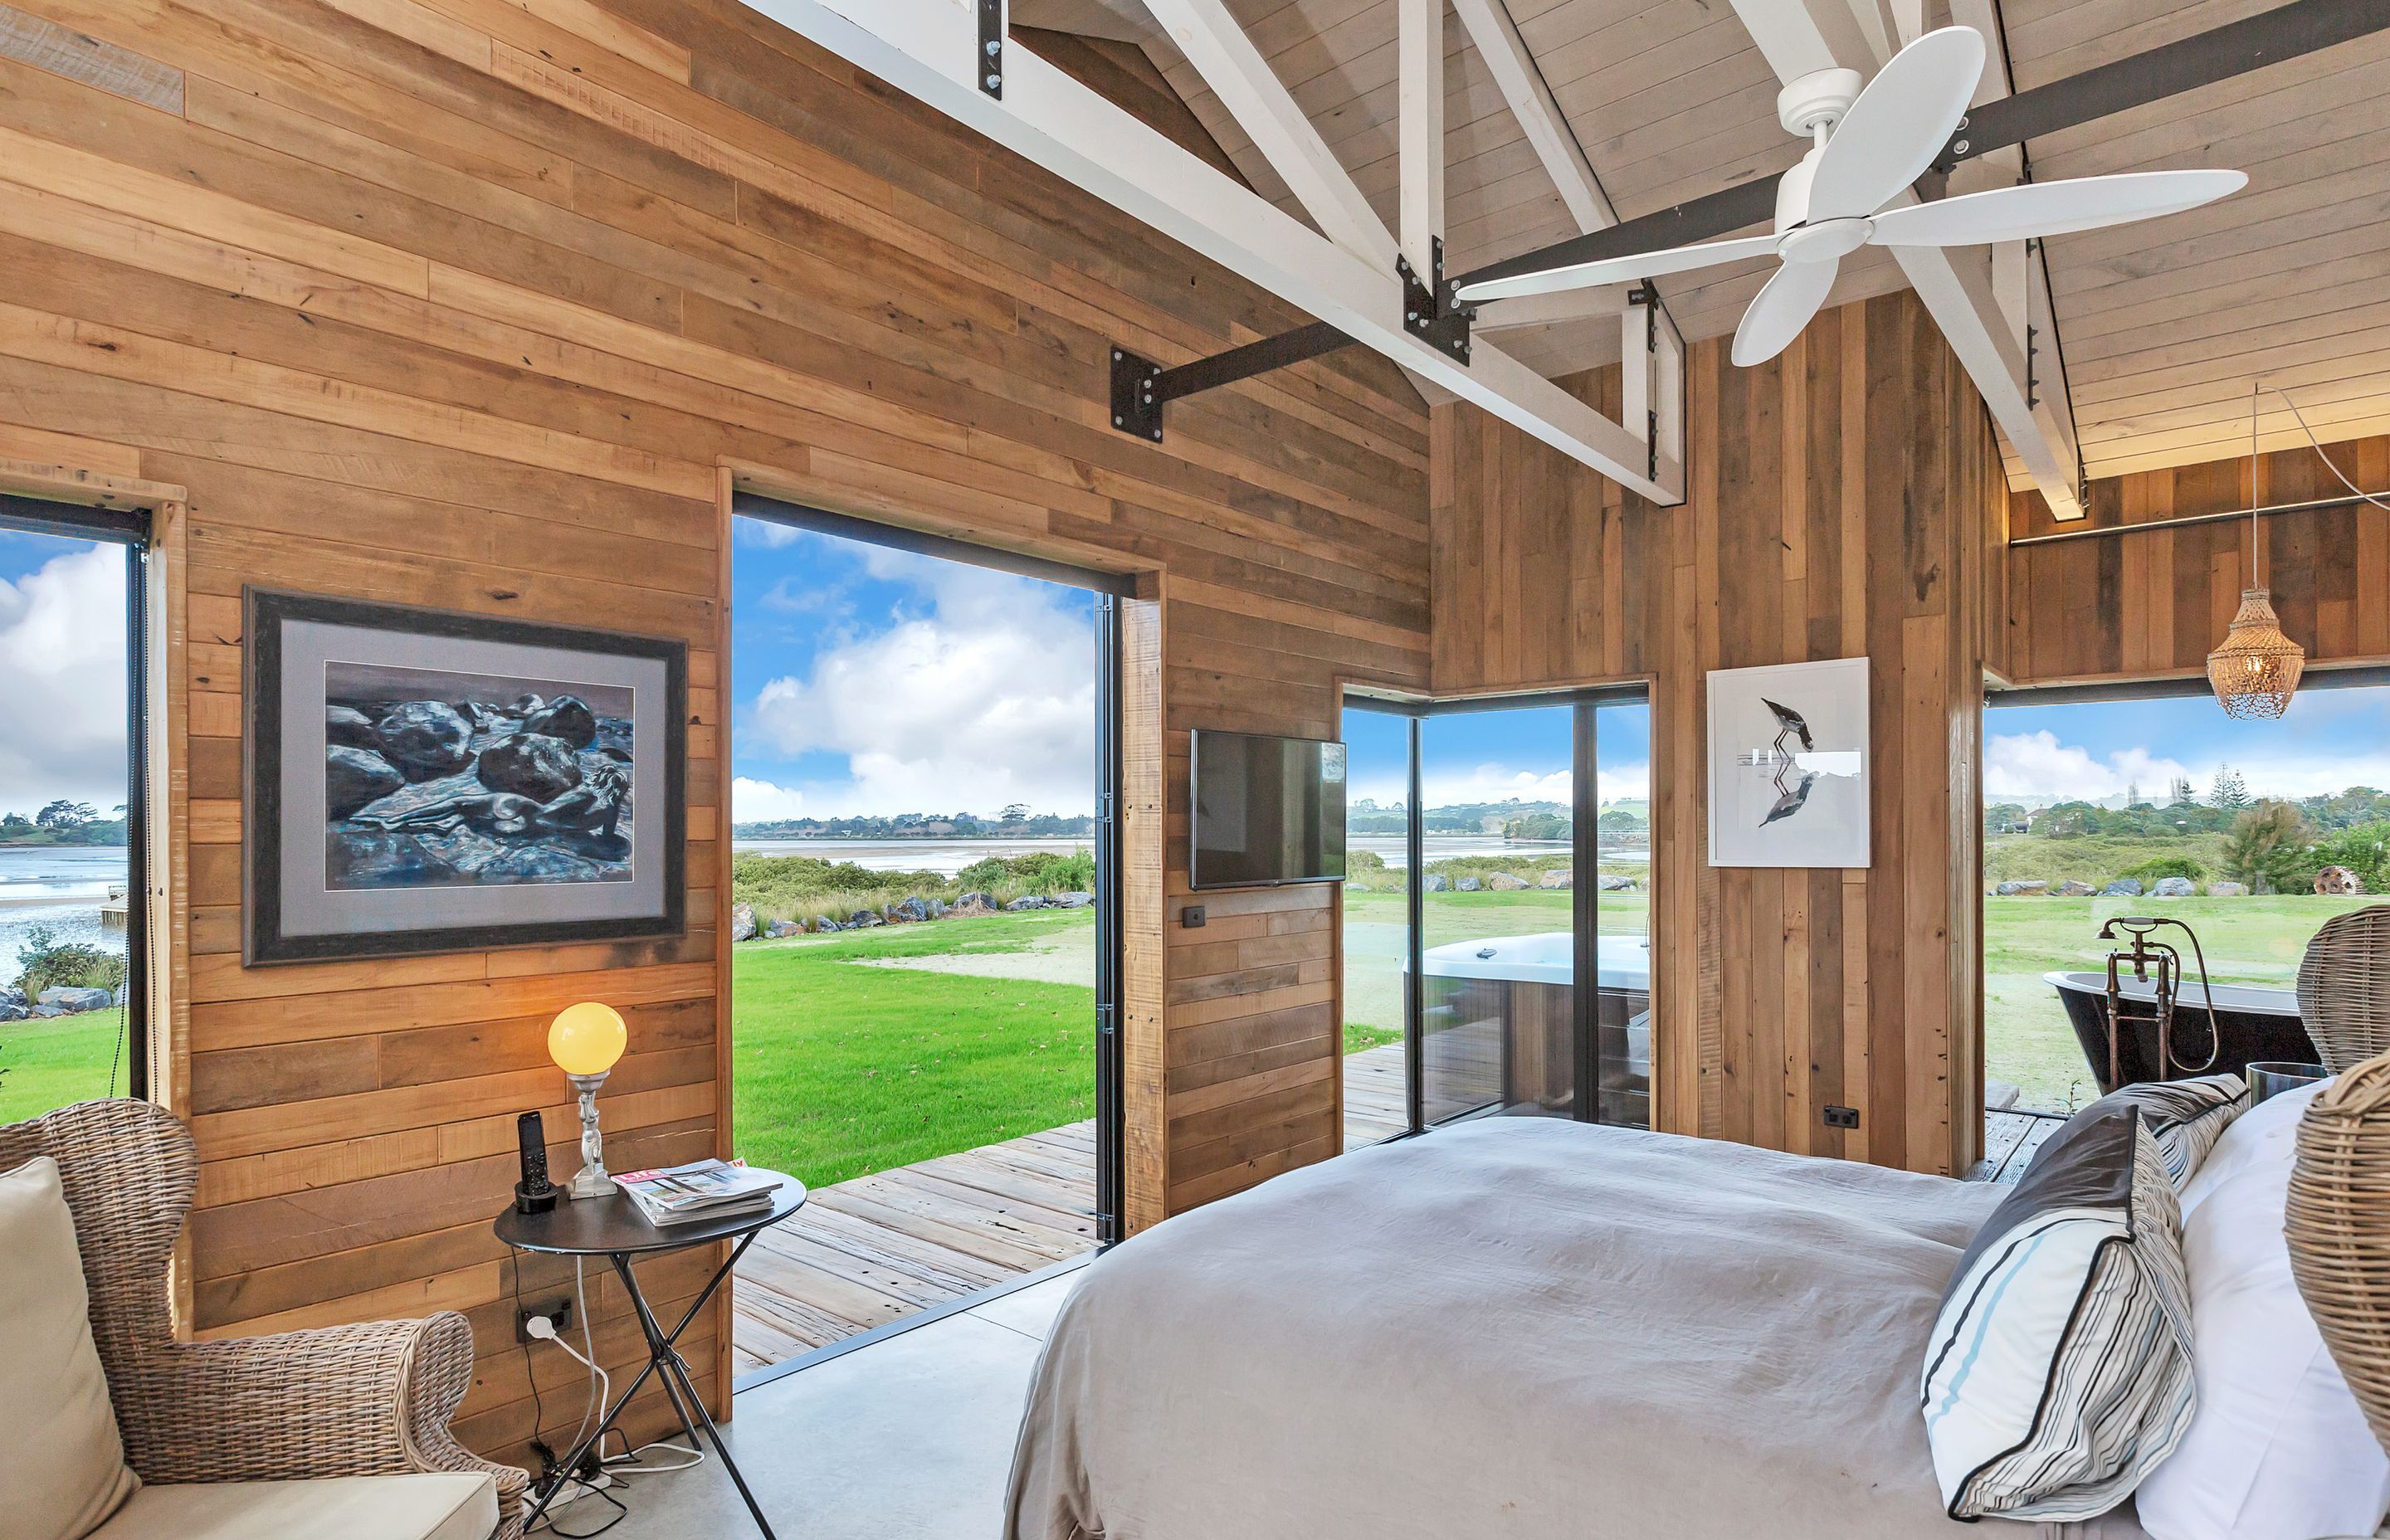 The master bedroom, en suite bath and spa enjoy views over the water.